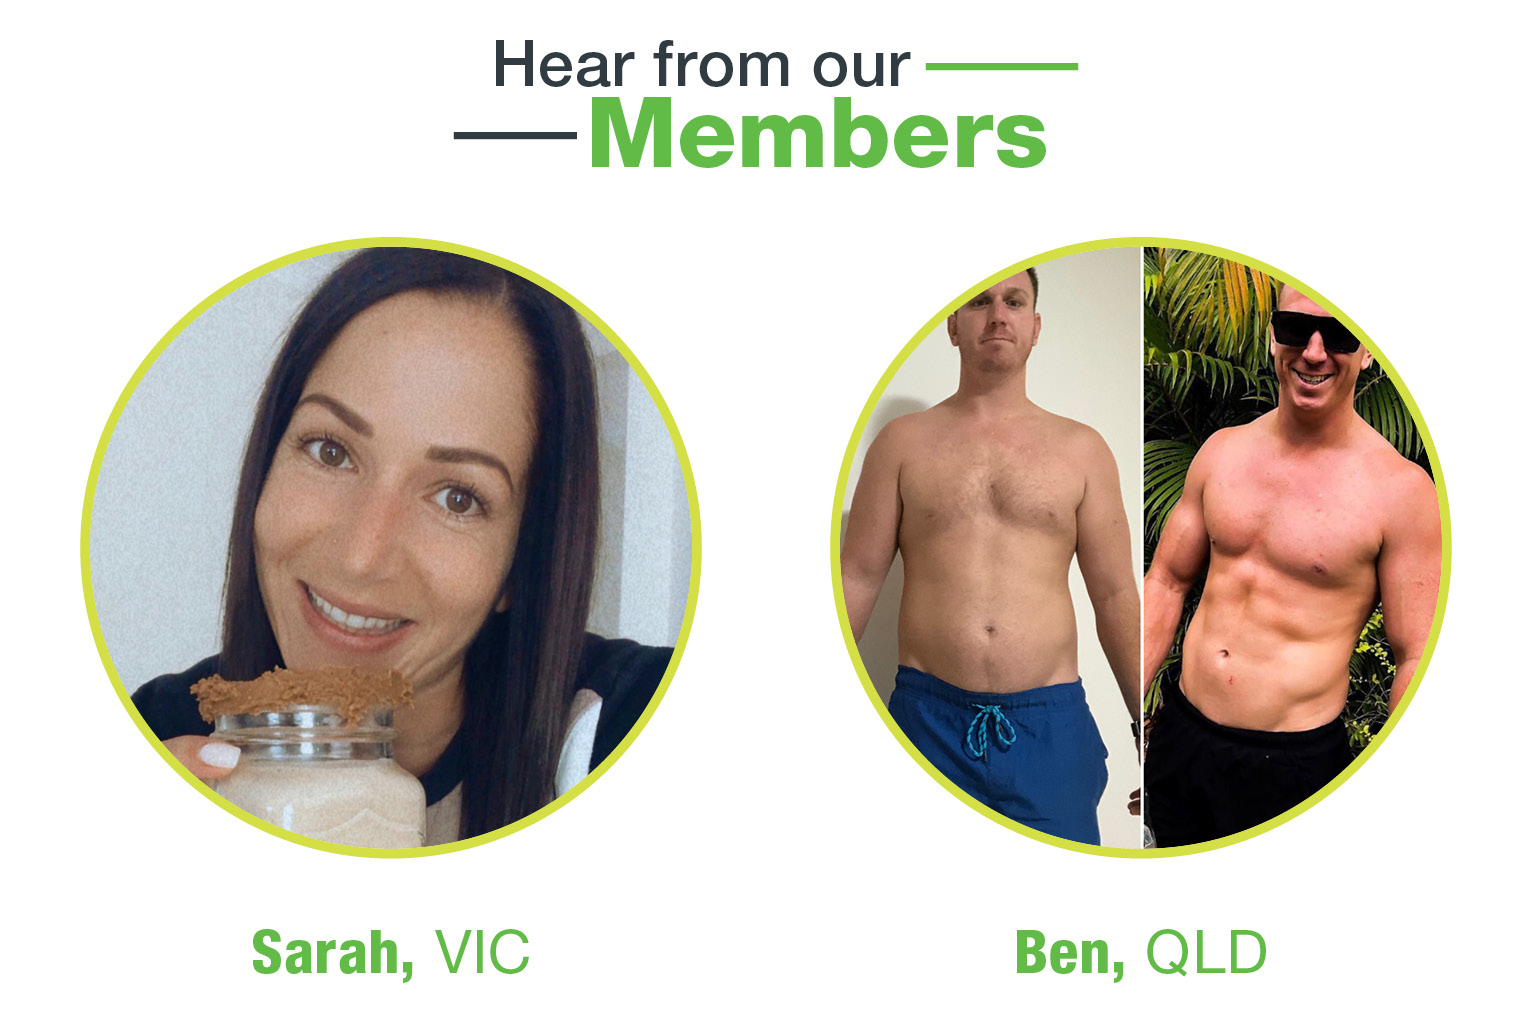 Article: Hear from our Members